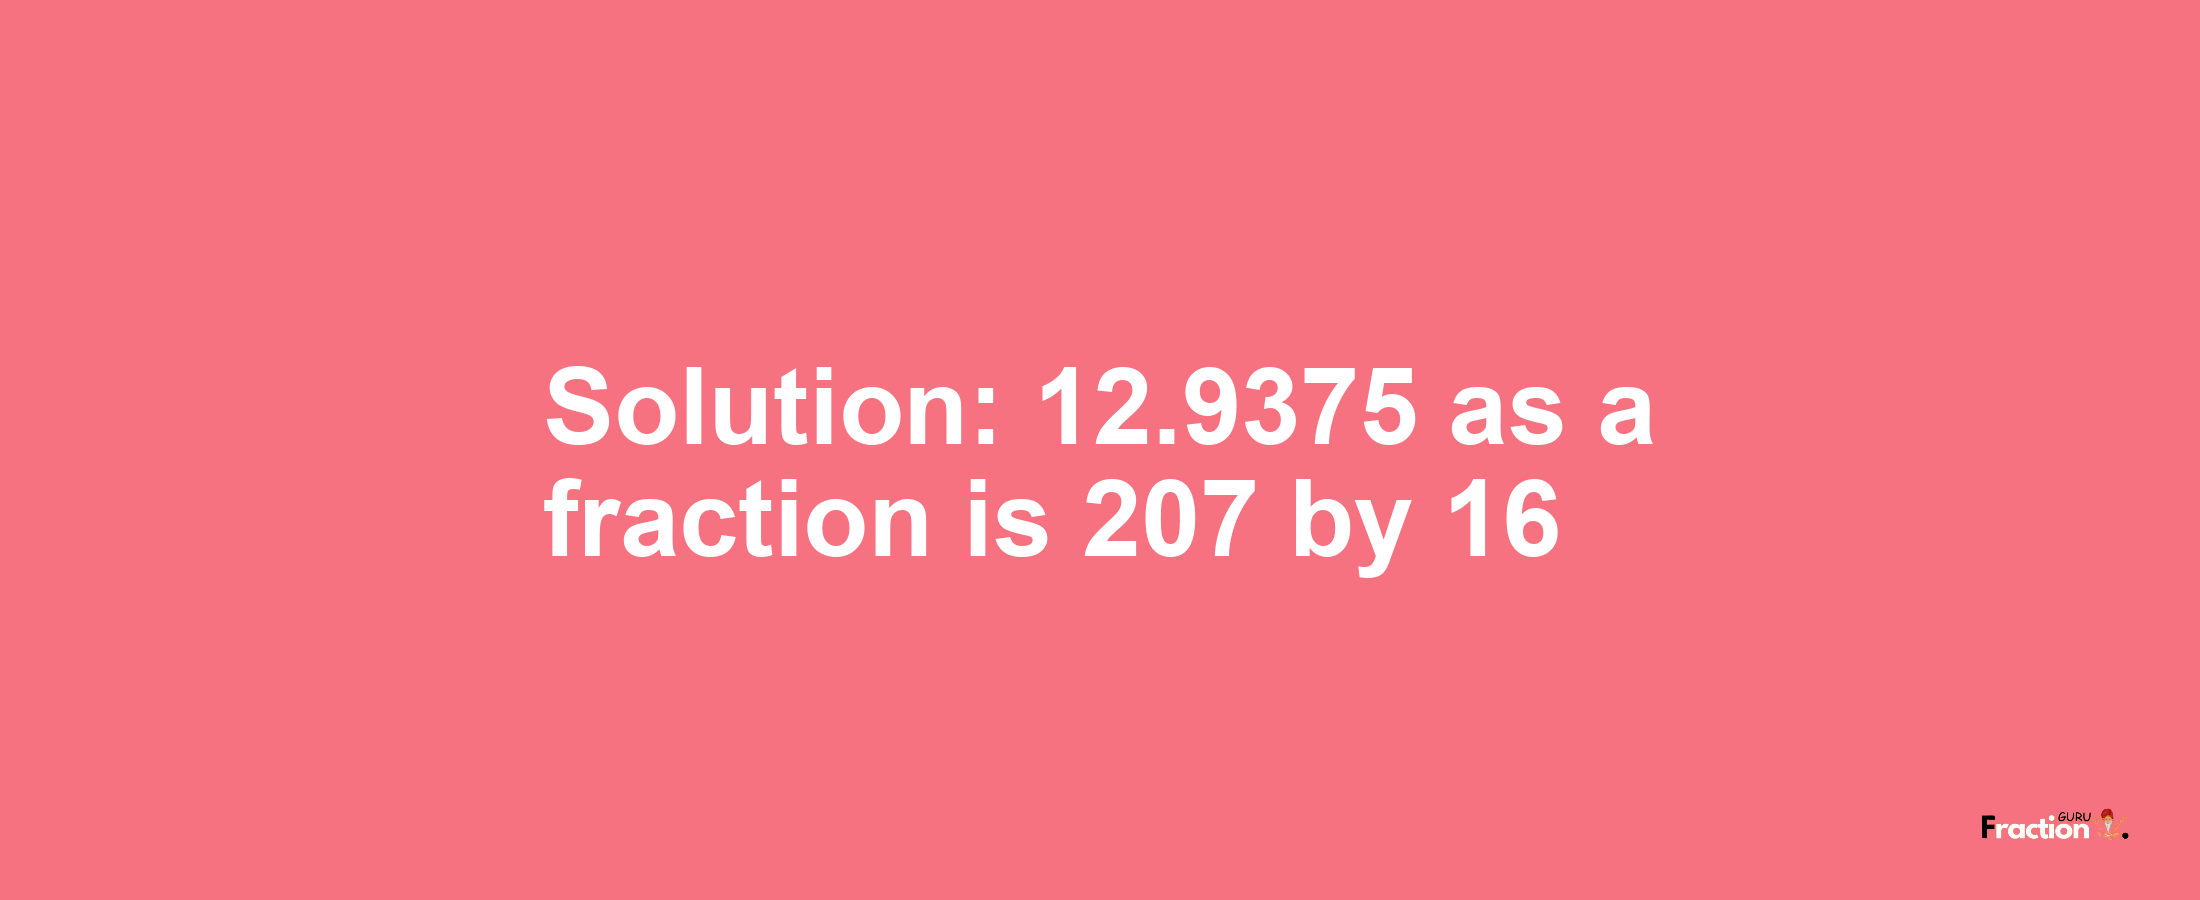 Solution:12.9375 as a fraction is 207/16